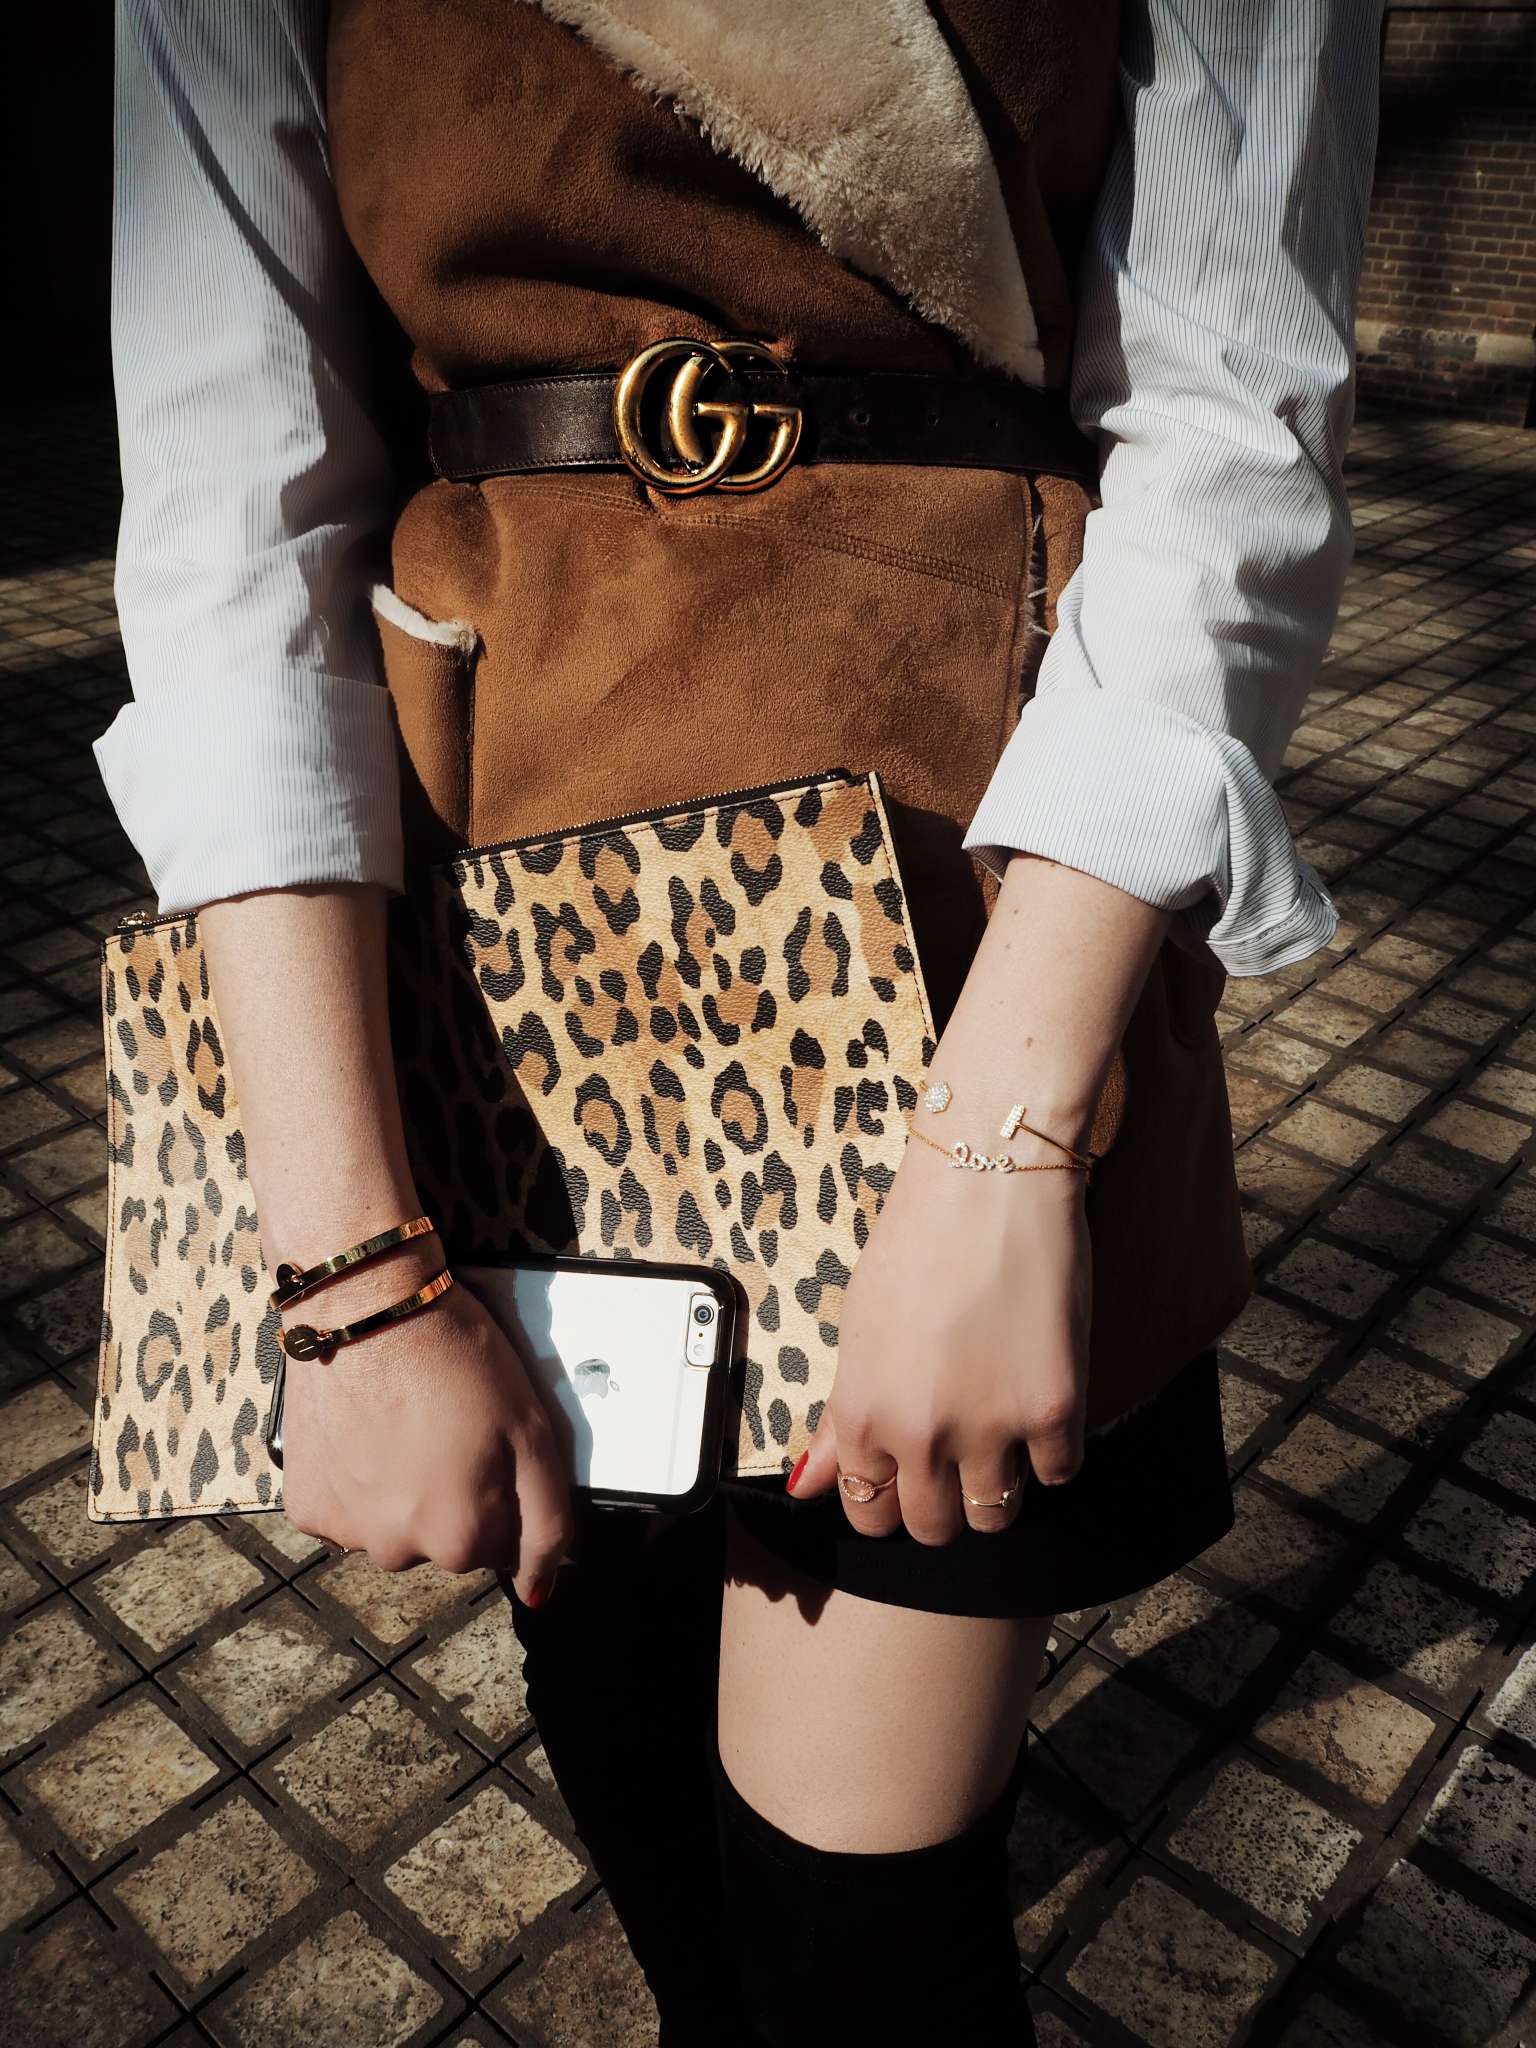 shearling-vest-gucci-belt-public-desire-over-the-knee-boots-givenchy-bag-leopard-print-myjewellery-initial-armband-symmetry-series-clear-phone-case-otterbox-scheepsvaart-museum-Amsterdam-hilton-hotel